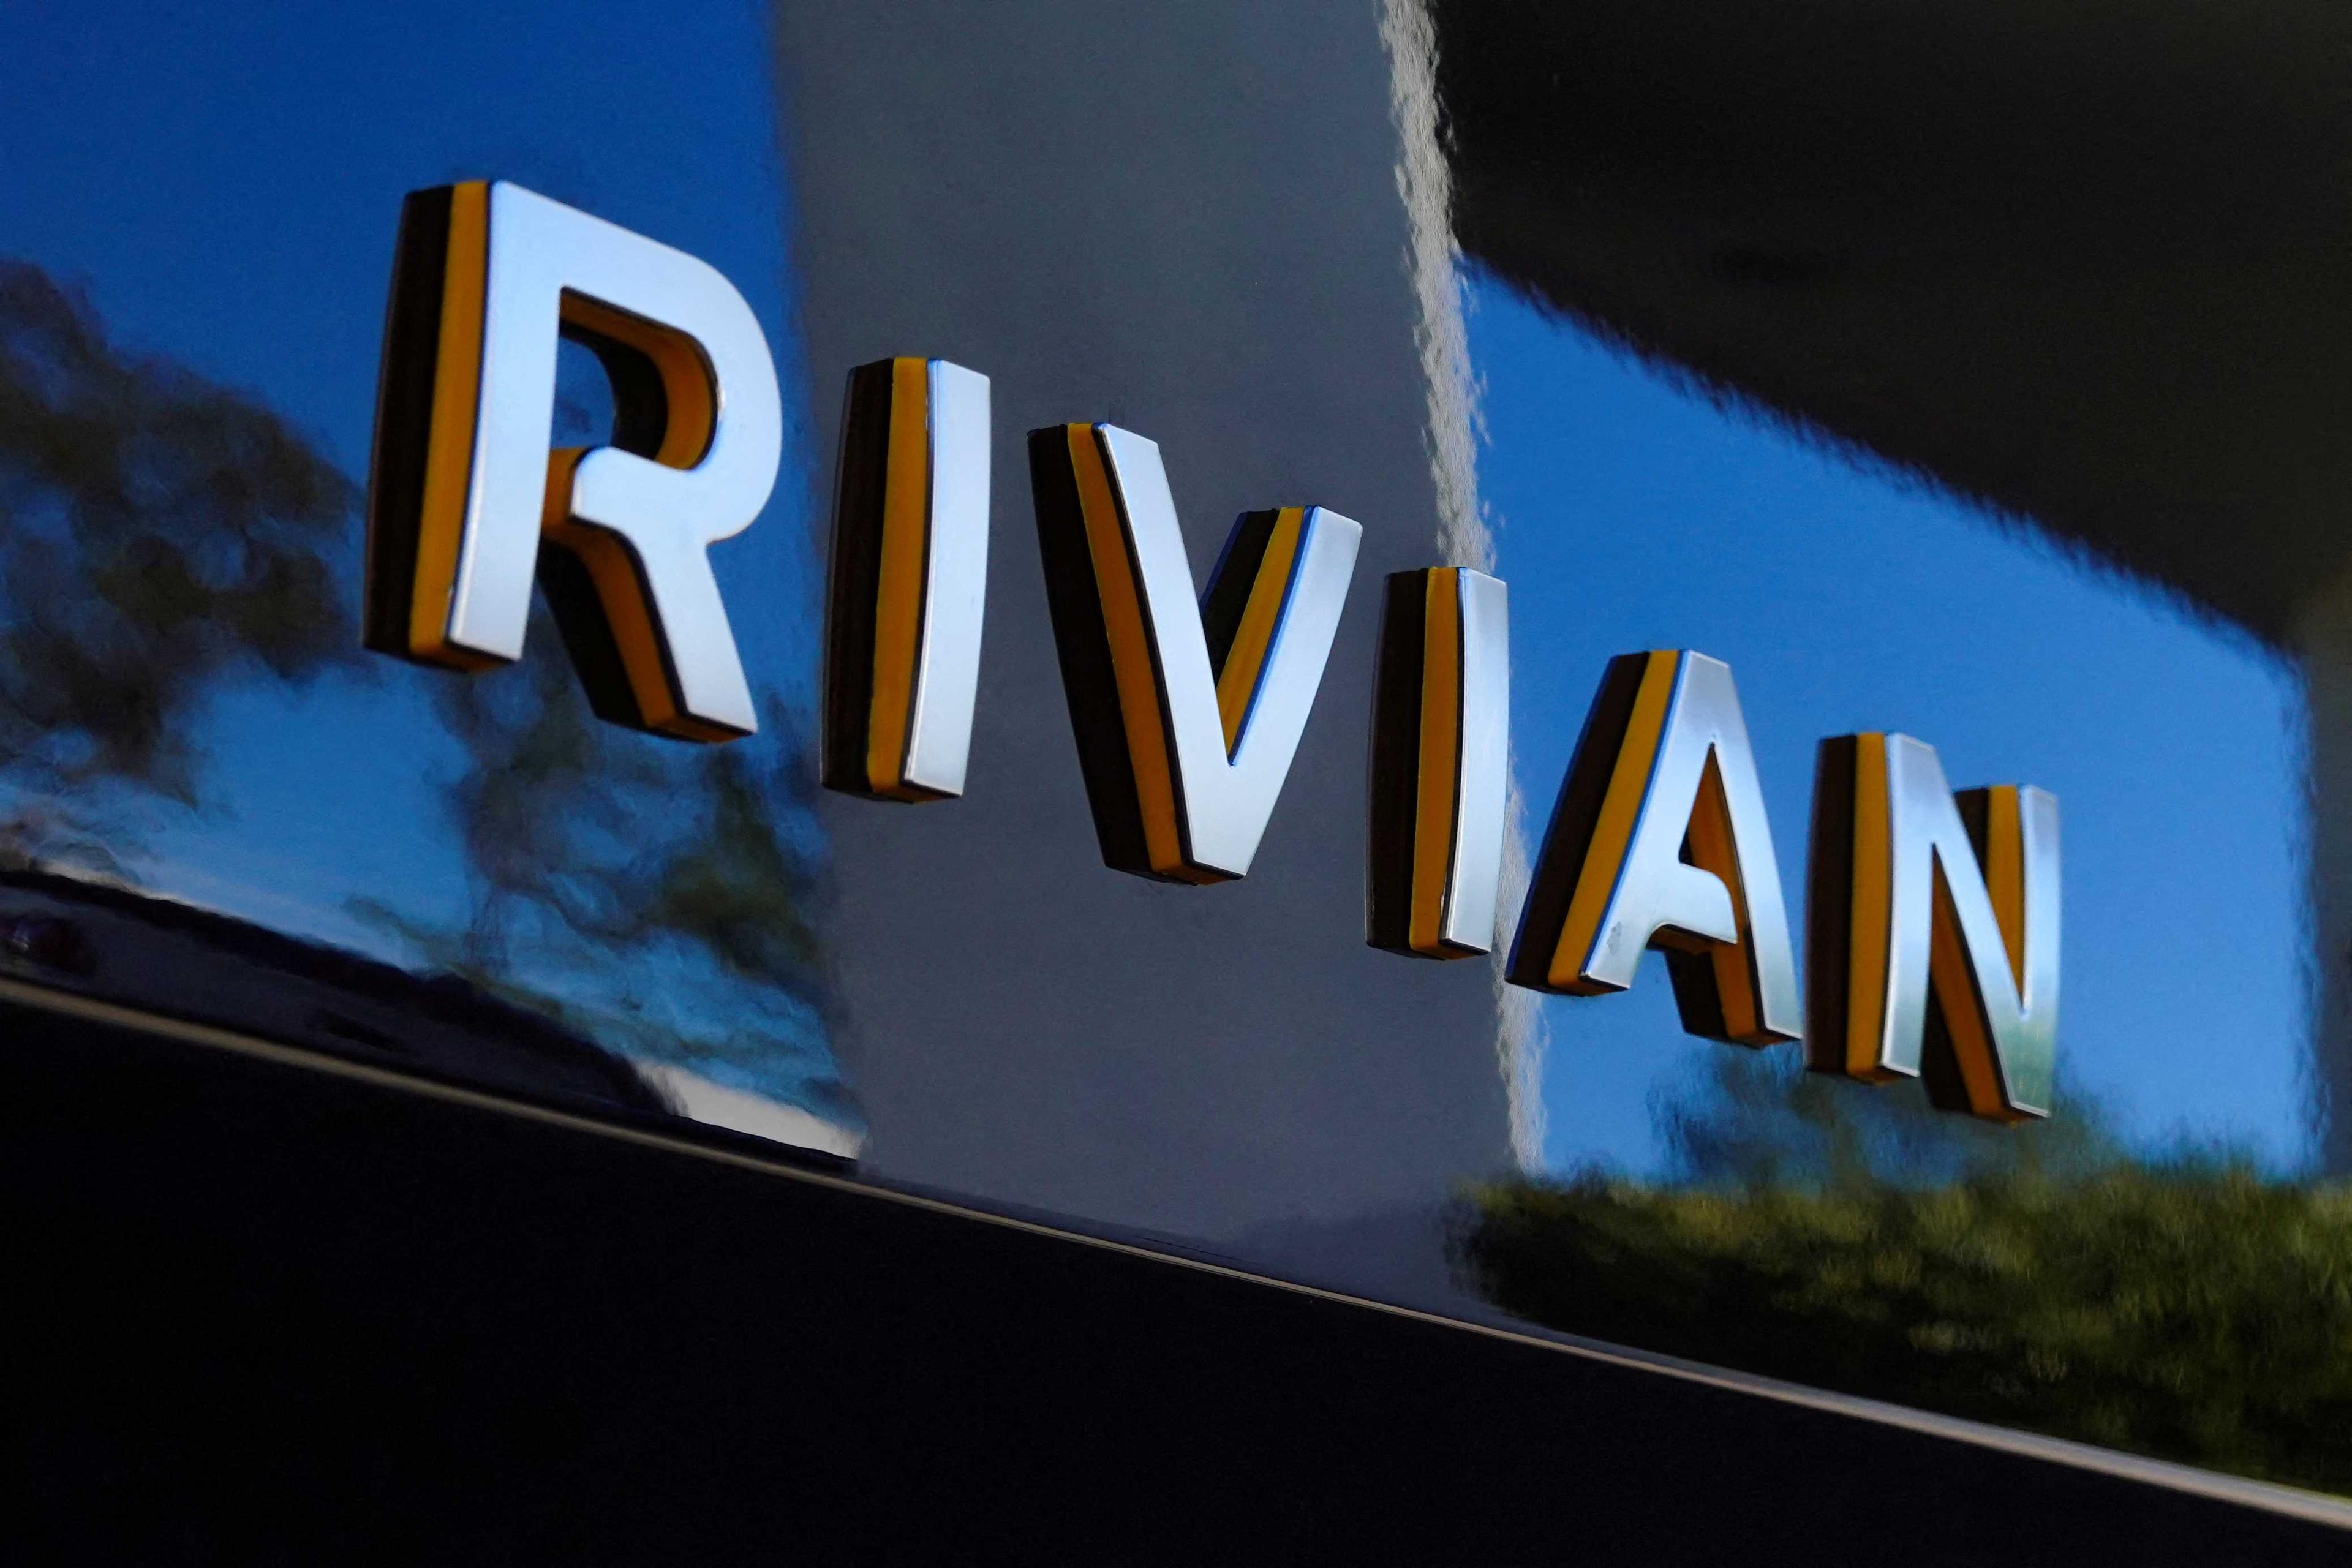 The Rivian name is shown on one of their new electric SUV vehicles in San Diego, US, Dec 16, 2022. Photo: Reuters